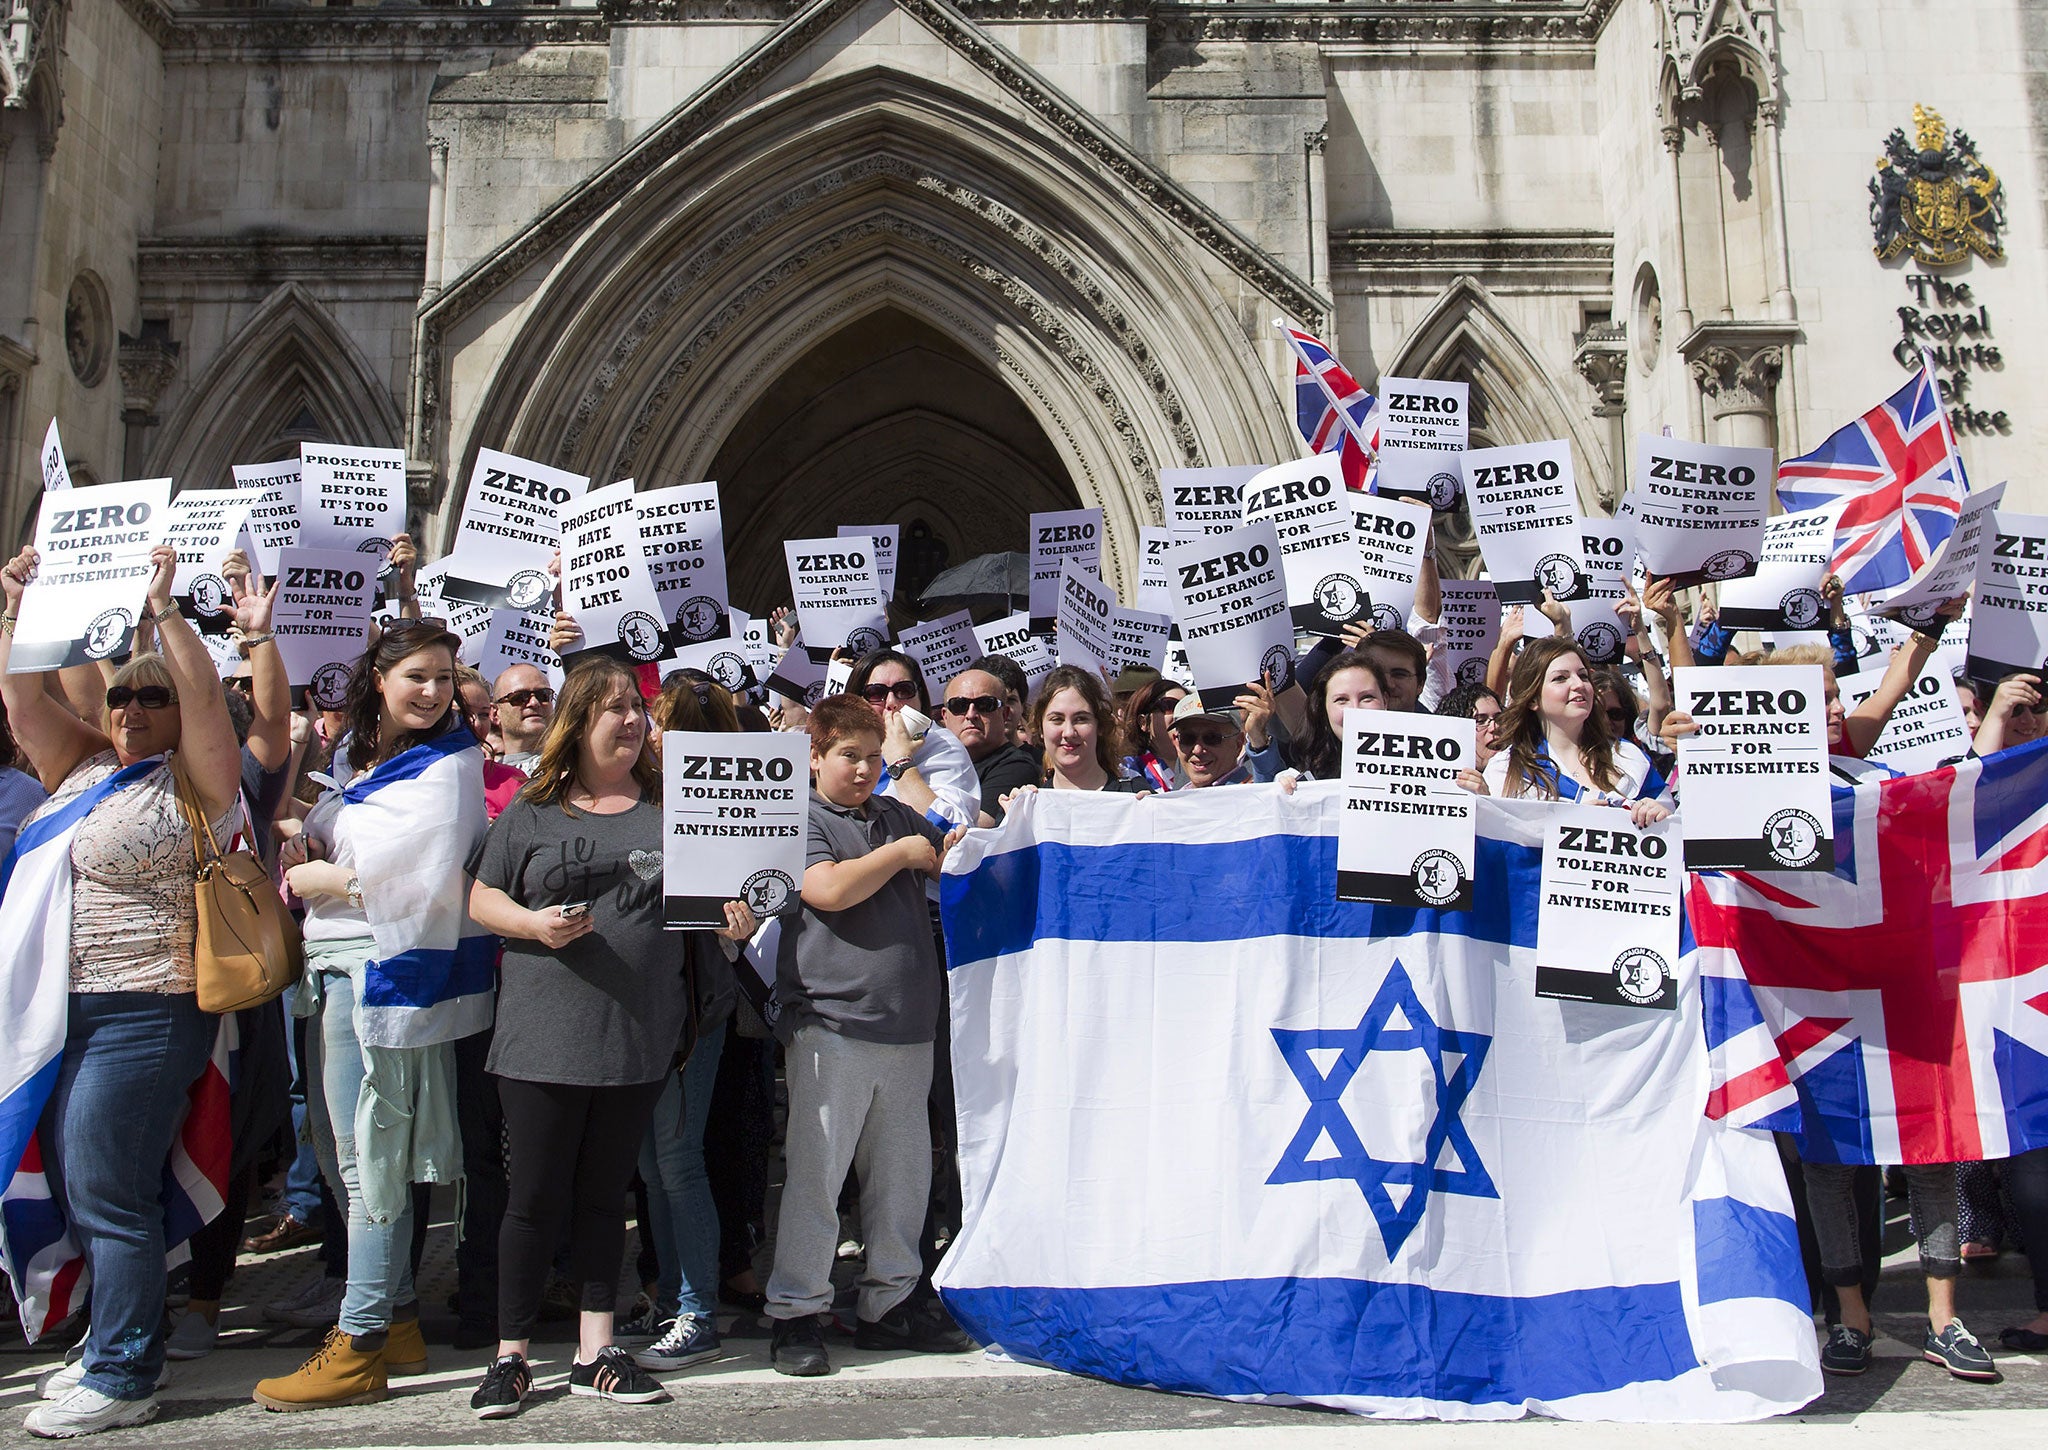 People hold placards and Israeli and Union flags outide the Royal Courts of Justice as Jewish groups rally in London on August 31, 2014, calling for 'Zero Tolerance for Anti-Semitism'.